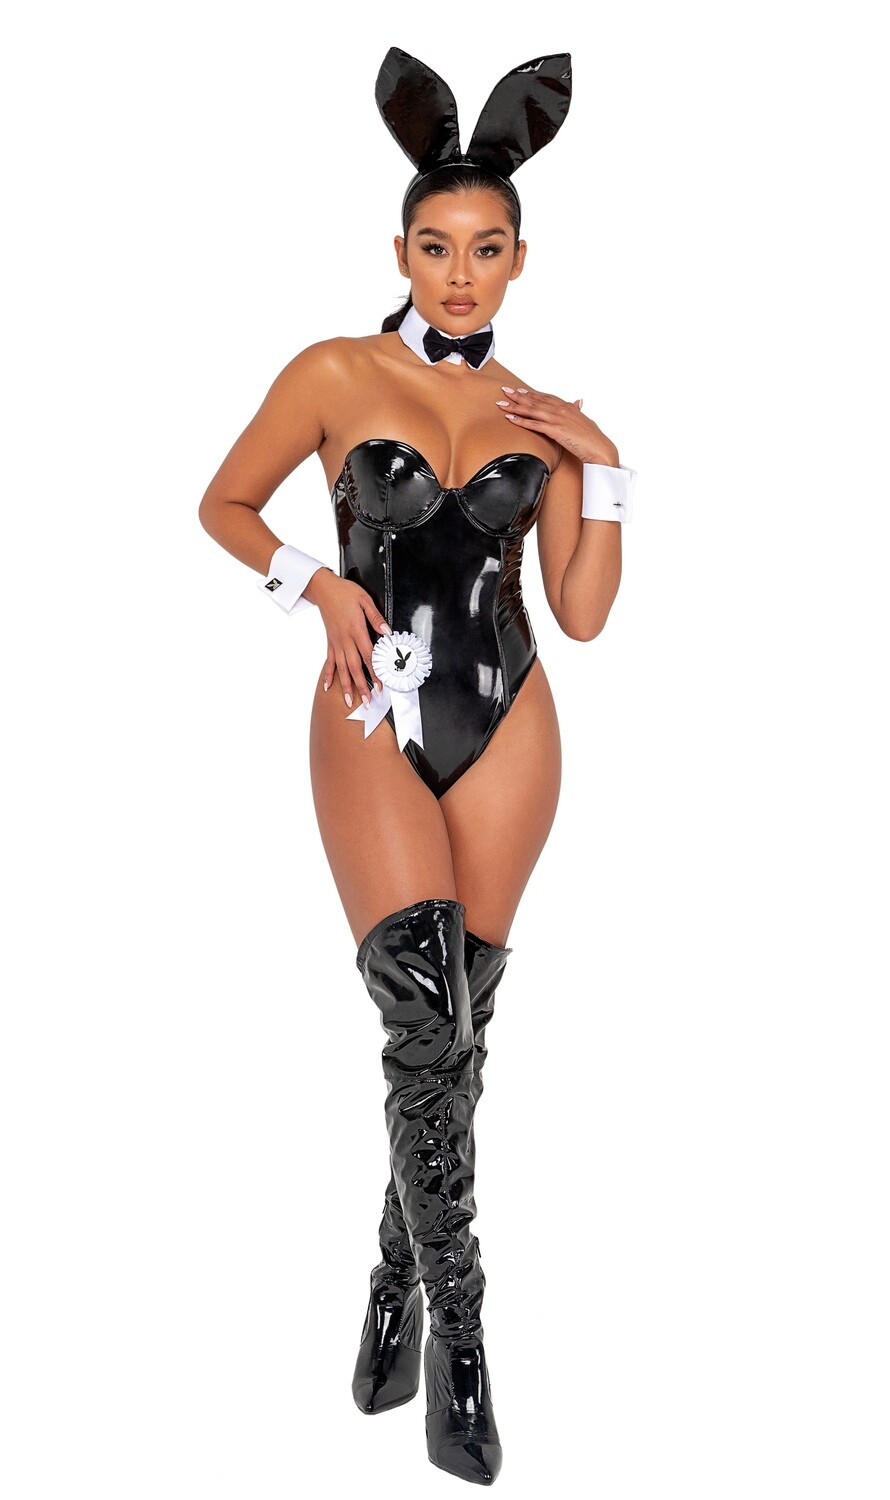 Officially Licensed Playboy Vinyl Seductress Bunny Costume